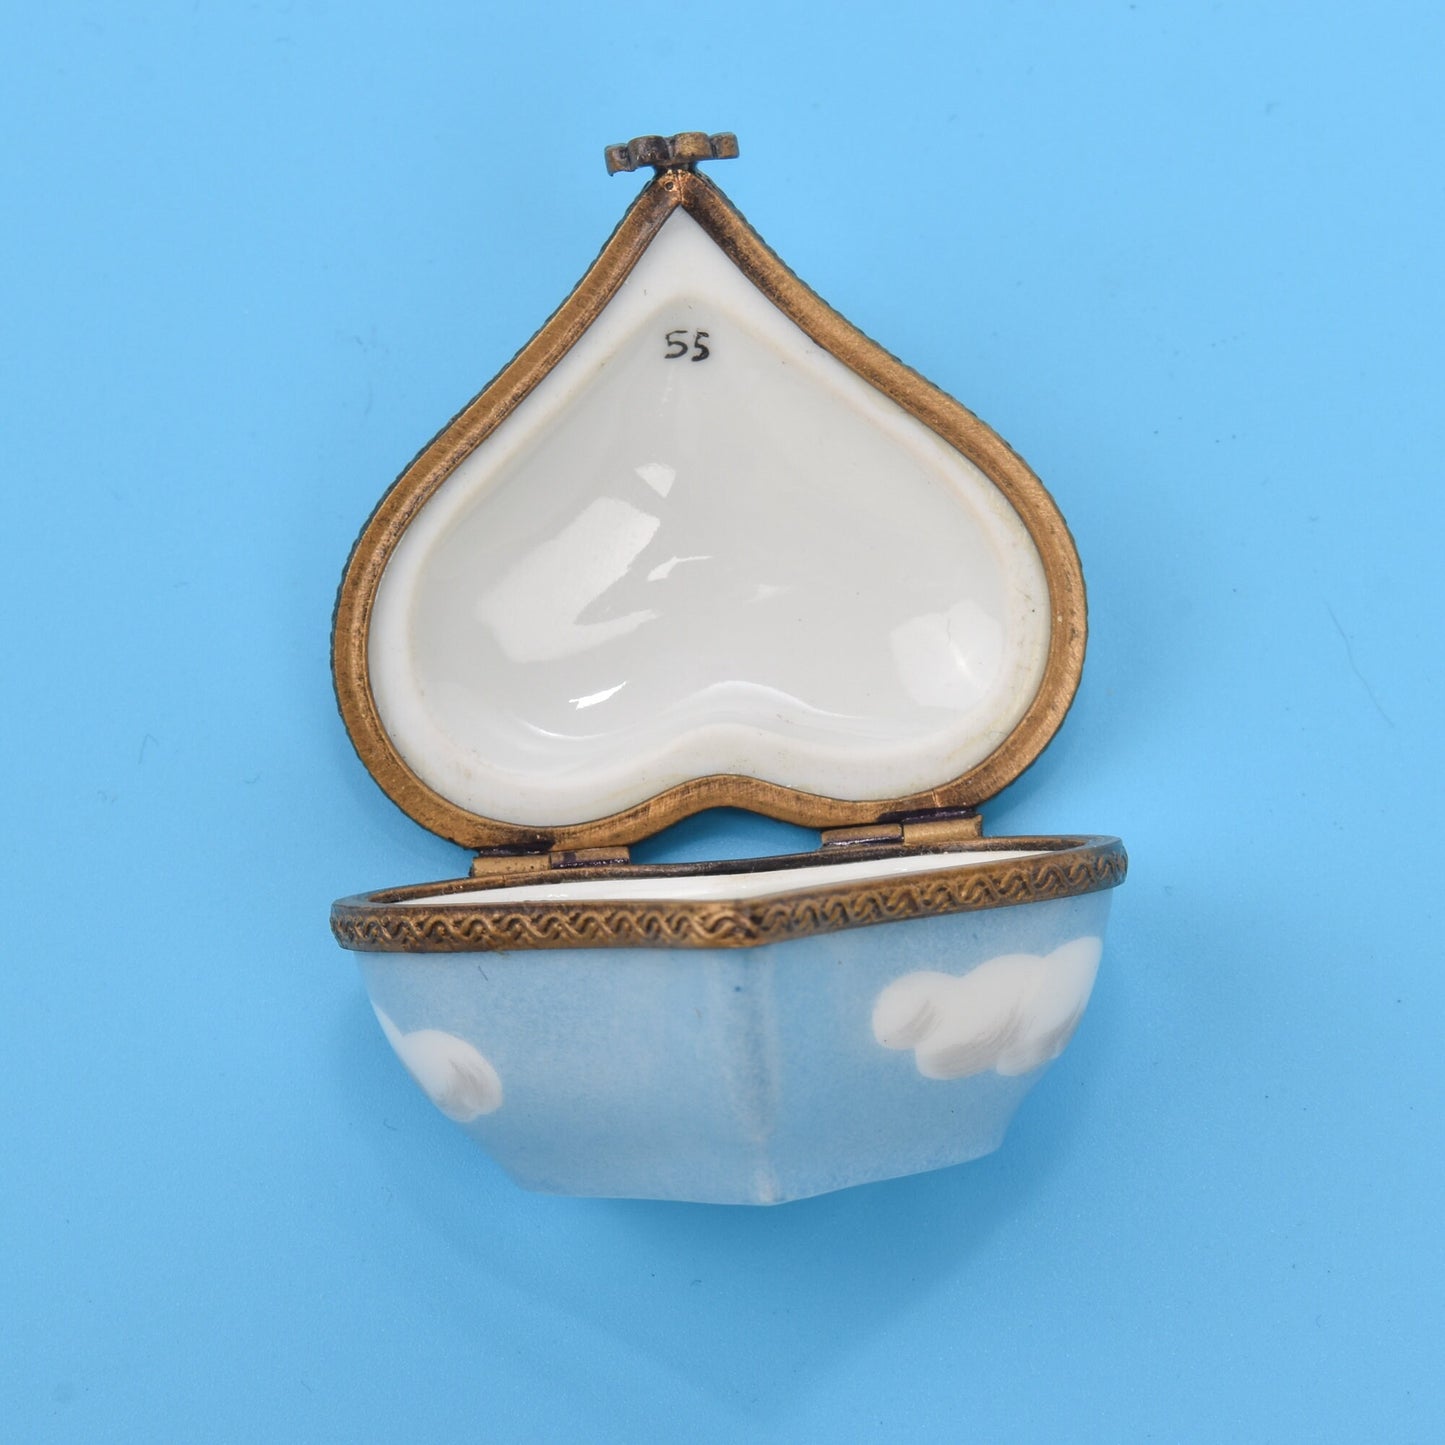 Limoges France Petit Main Porcelain Trinket Box, Heart-Shaped Box With Sun In The Clouds, Floral Motifs